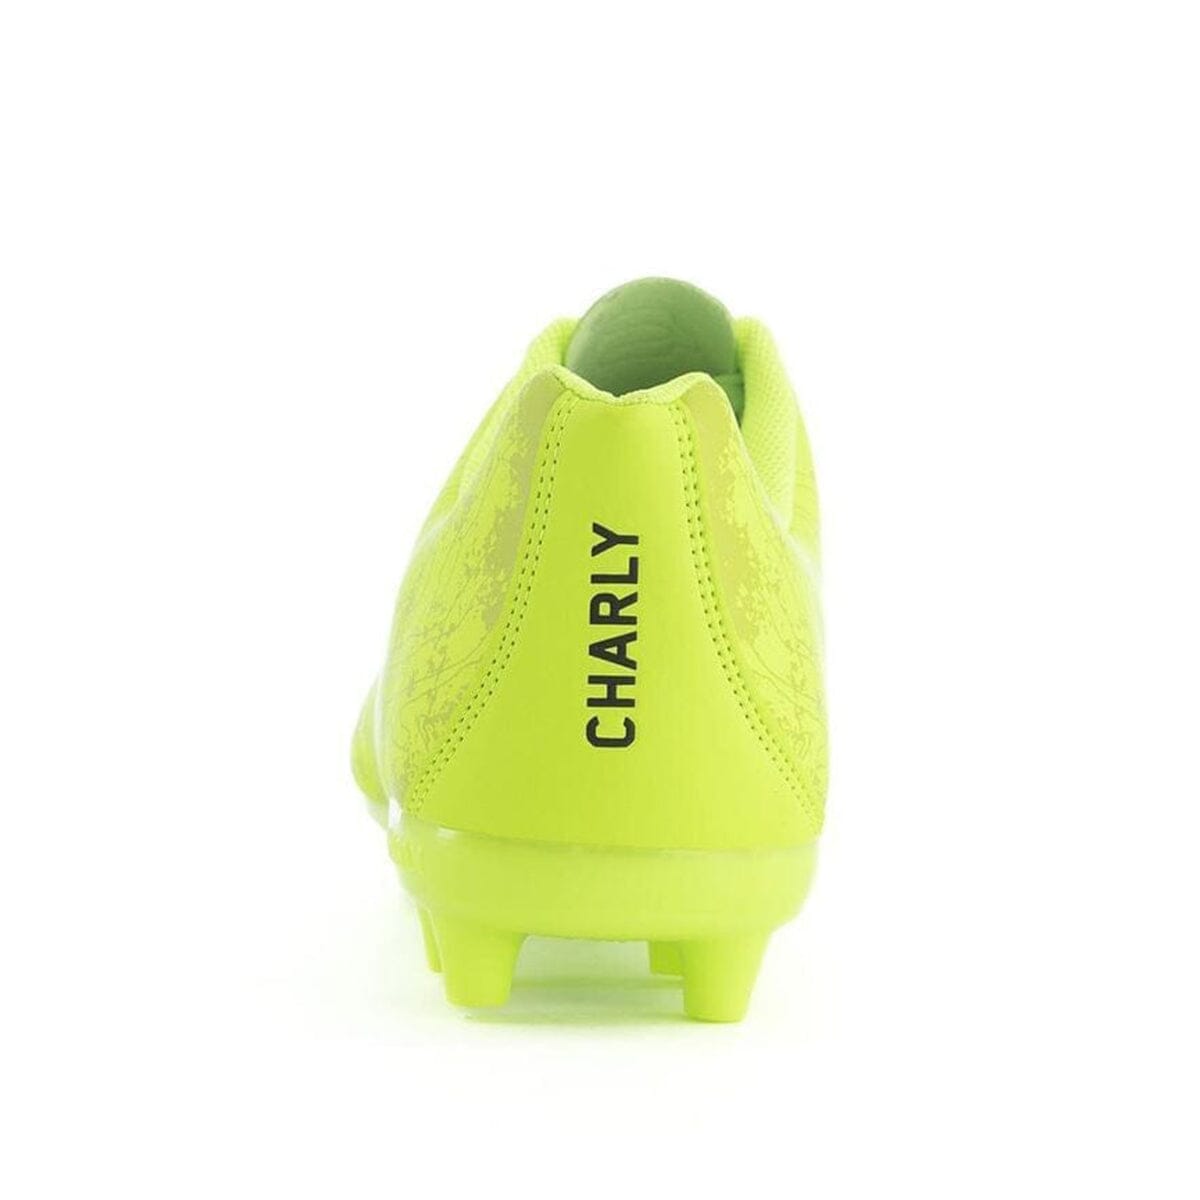 Charly Hotcross 2.0 Firm Ground Soccer Cleats | 1098597003 Cleats Charly 